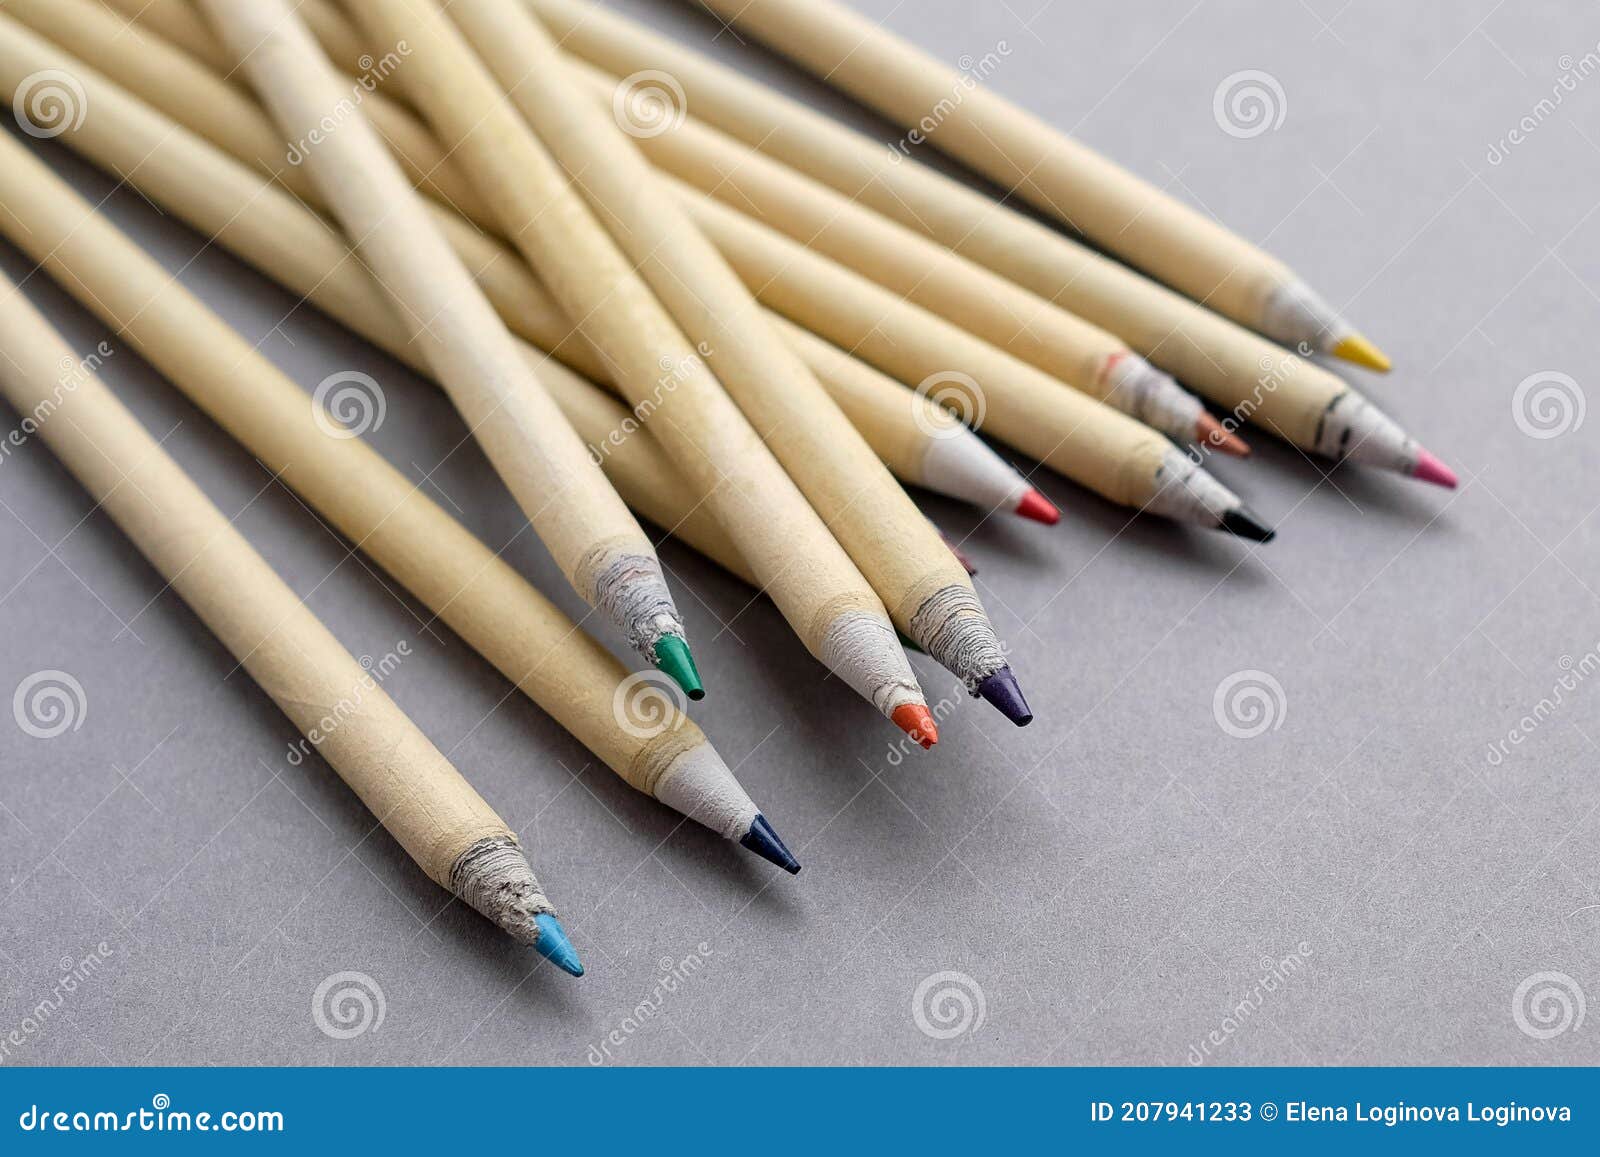 https://thumbs.dreamstime.com/z/eco-friendly-pencils-colored-pencils-drawing-grey-background-eco-friendly-pencils-colored-pencils-drawing-grey-background-207941233.jpg